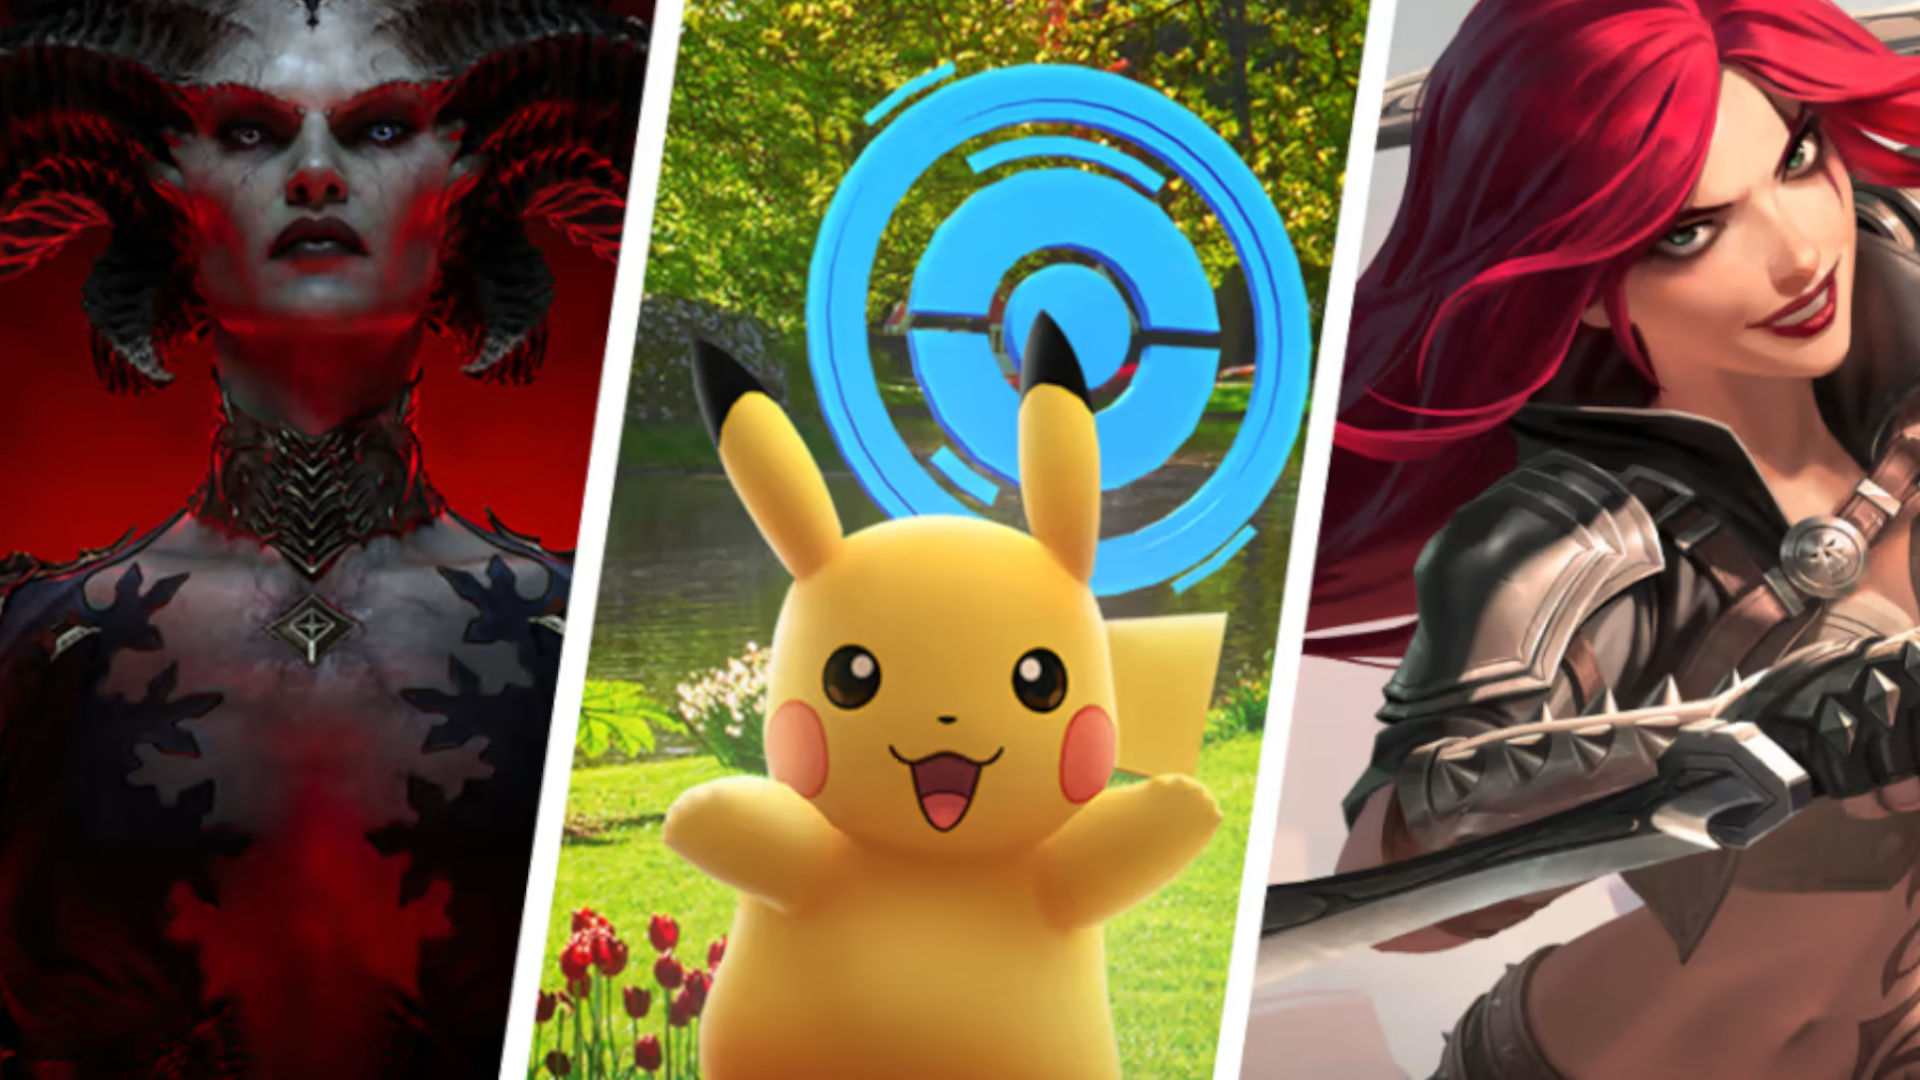 The Prime Gaming August content is bringing the heat this summer